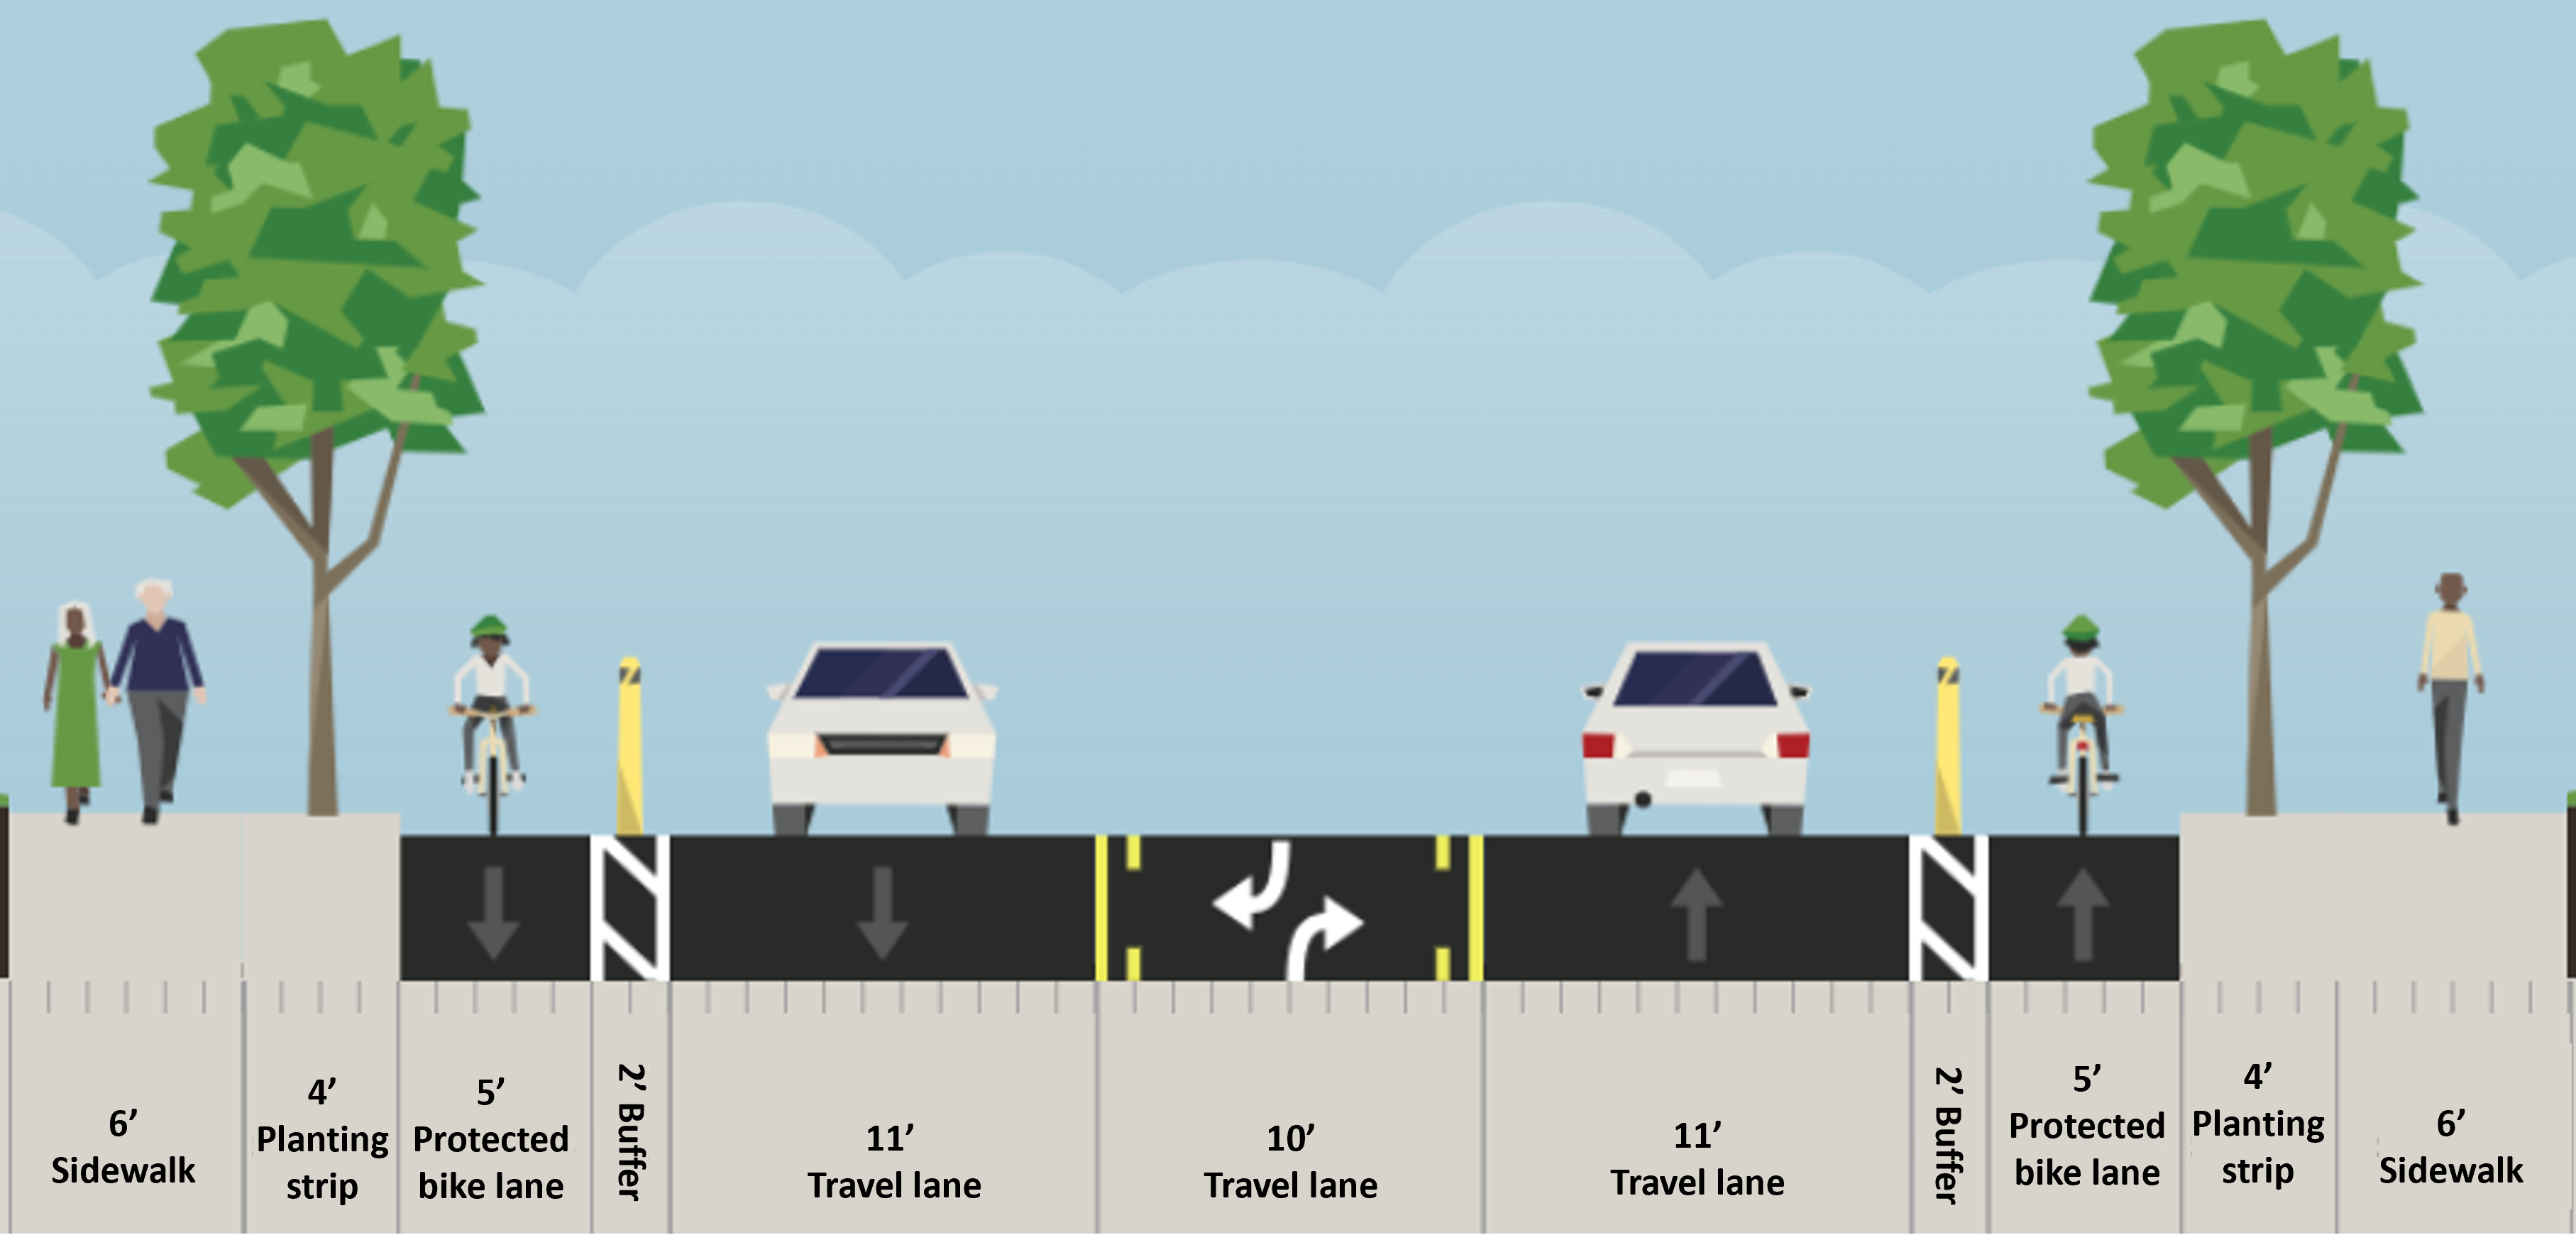 Proposed layout of typical street configuration. Each side of the street includes a 6 feet wide sidewalk, 4 feet wide planting strip, 5 feet wide protected bike lane with a 2 feet wide buffer, and 11 feet wide vehicle lanes. There is also a 10 feet wide center turn lane. 